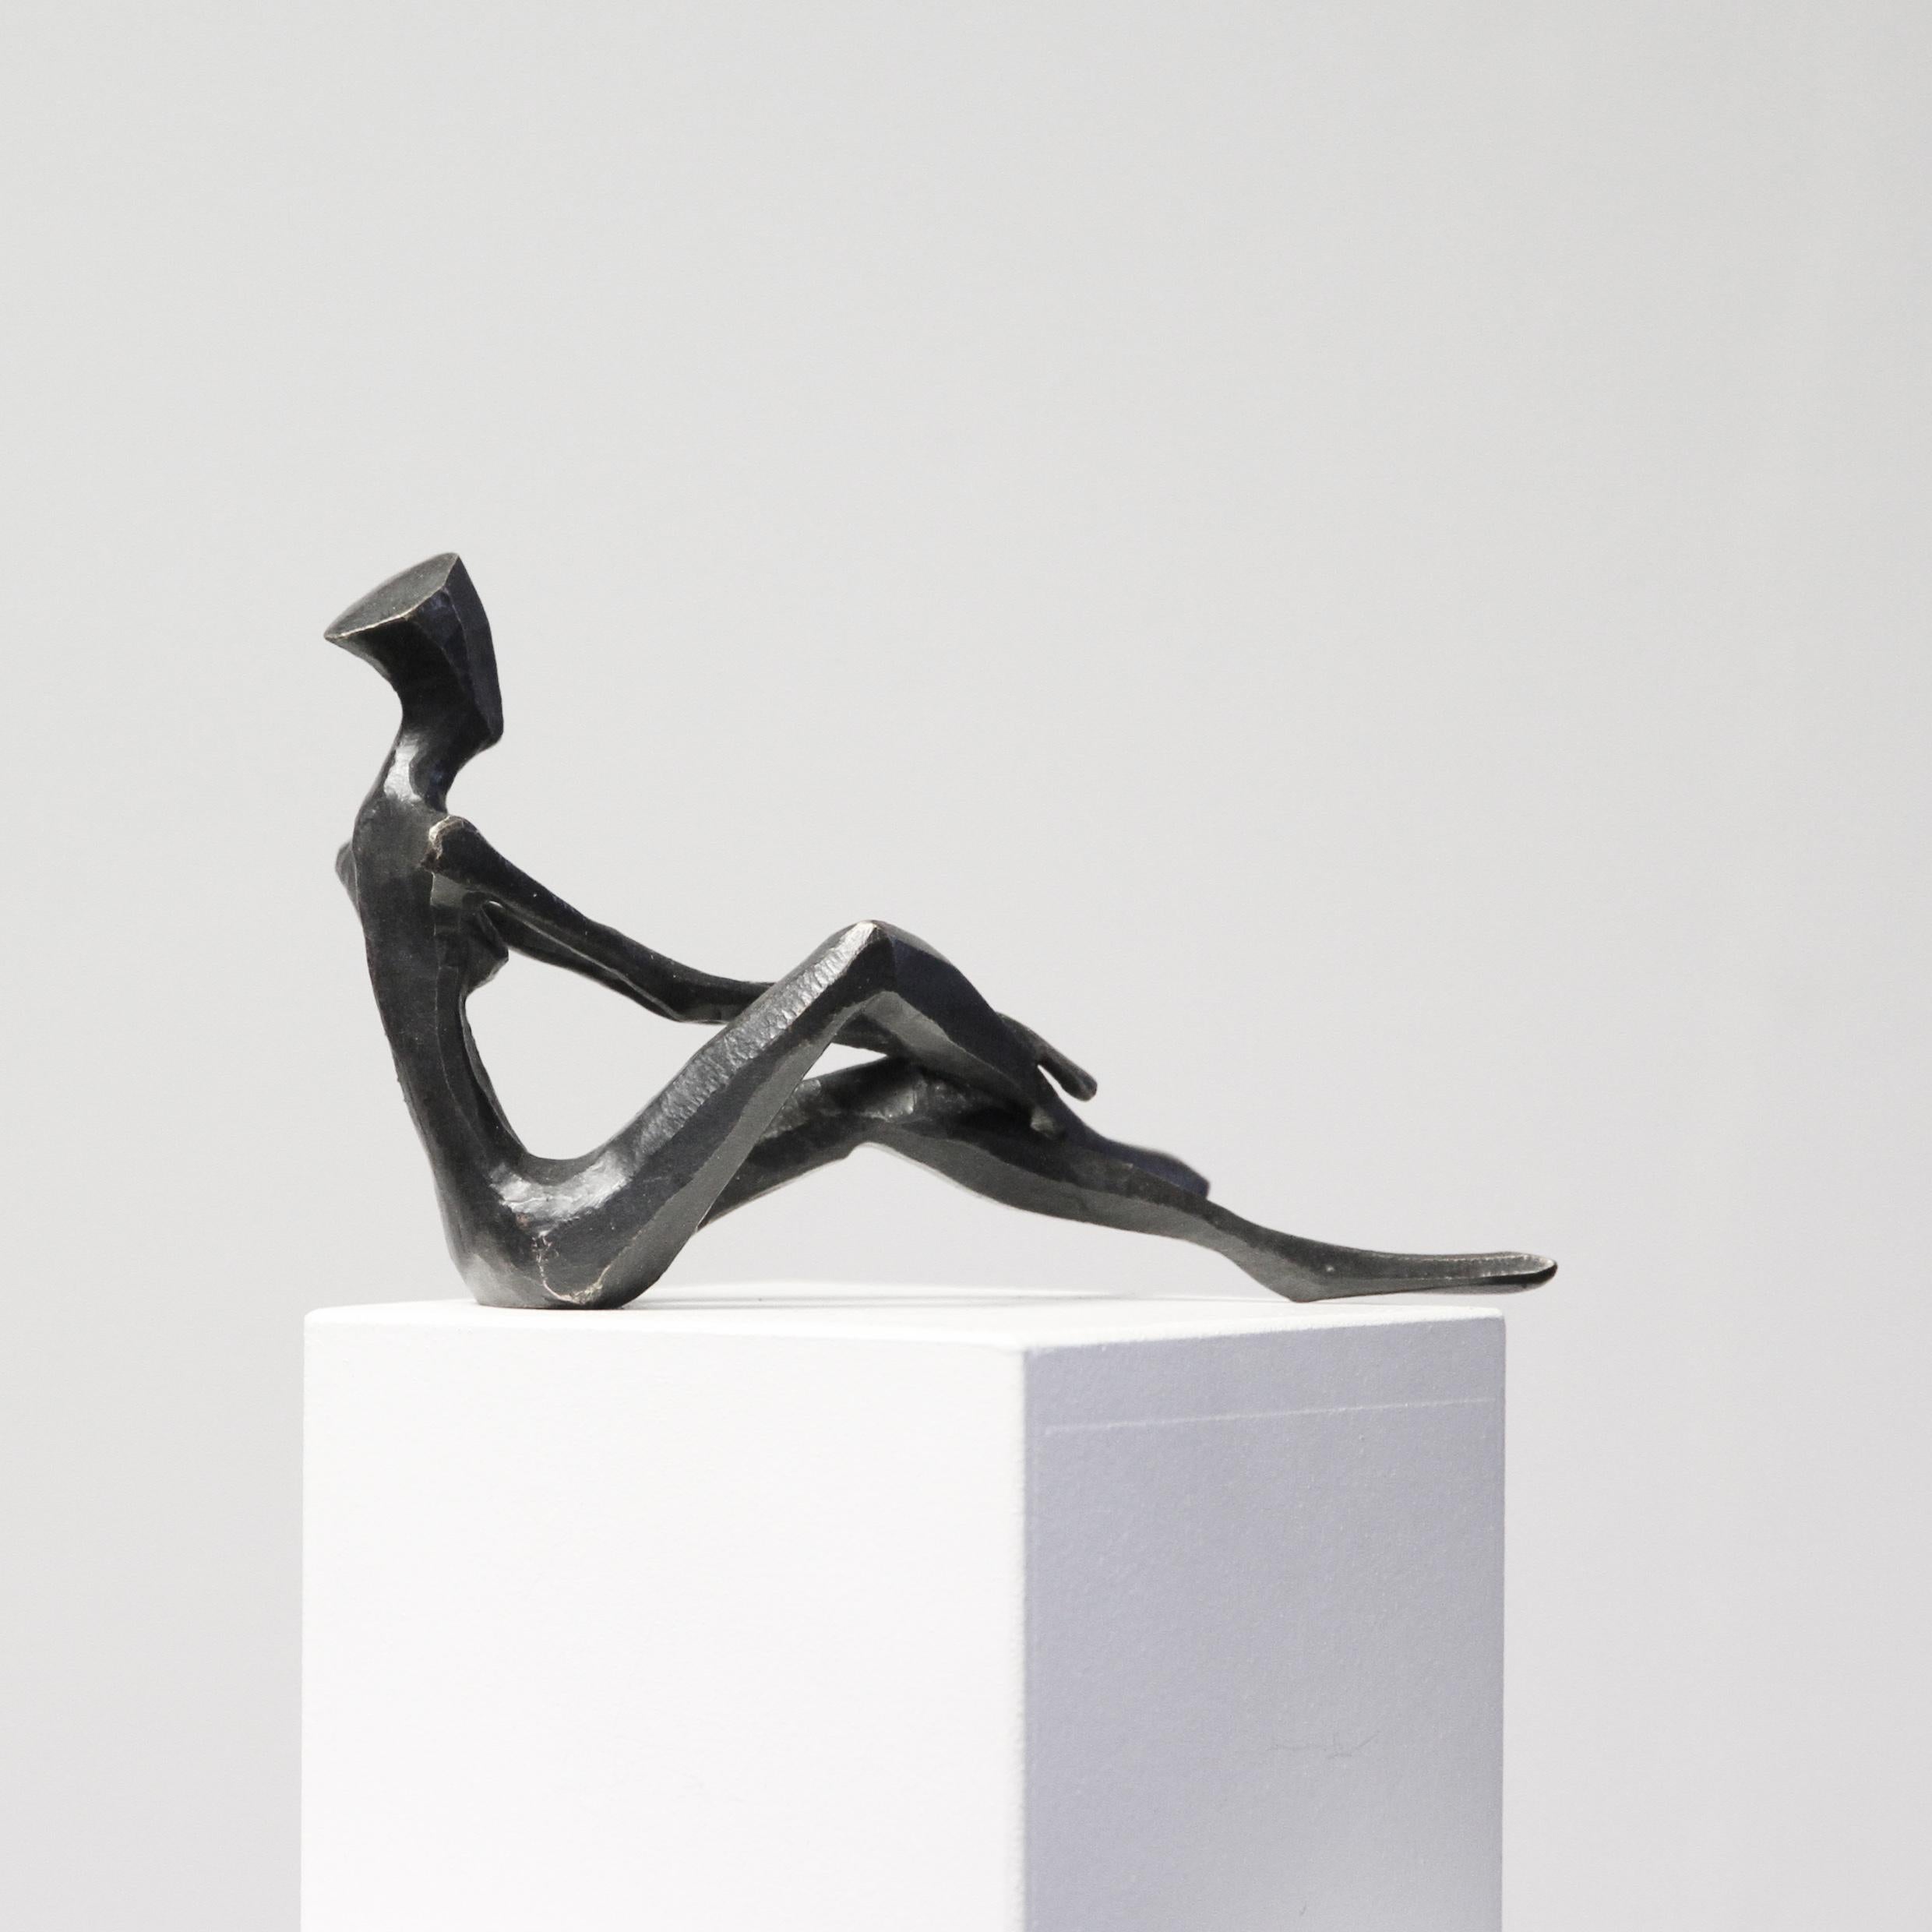 Kathryn is a figurative bronze sculpture in a relaxed pose by Nando Kallweit.

Modelled on modern youthful postures but with a nod to the importance of heritage through the stylised Egyptian-influenced head. A lovely piece on its own or with a group